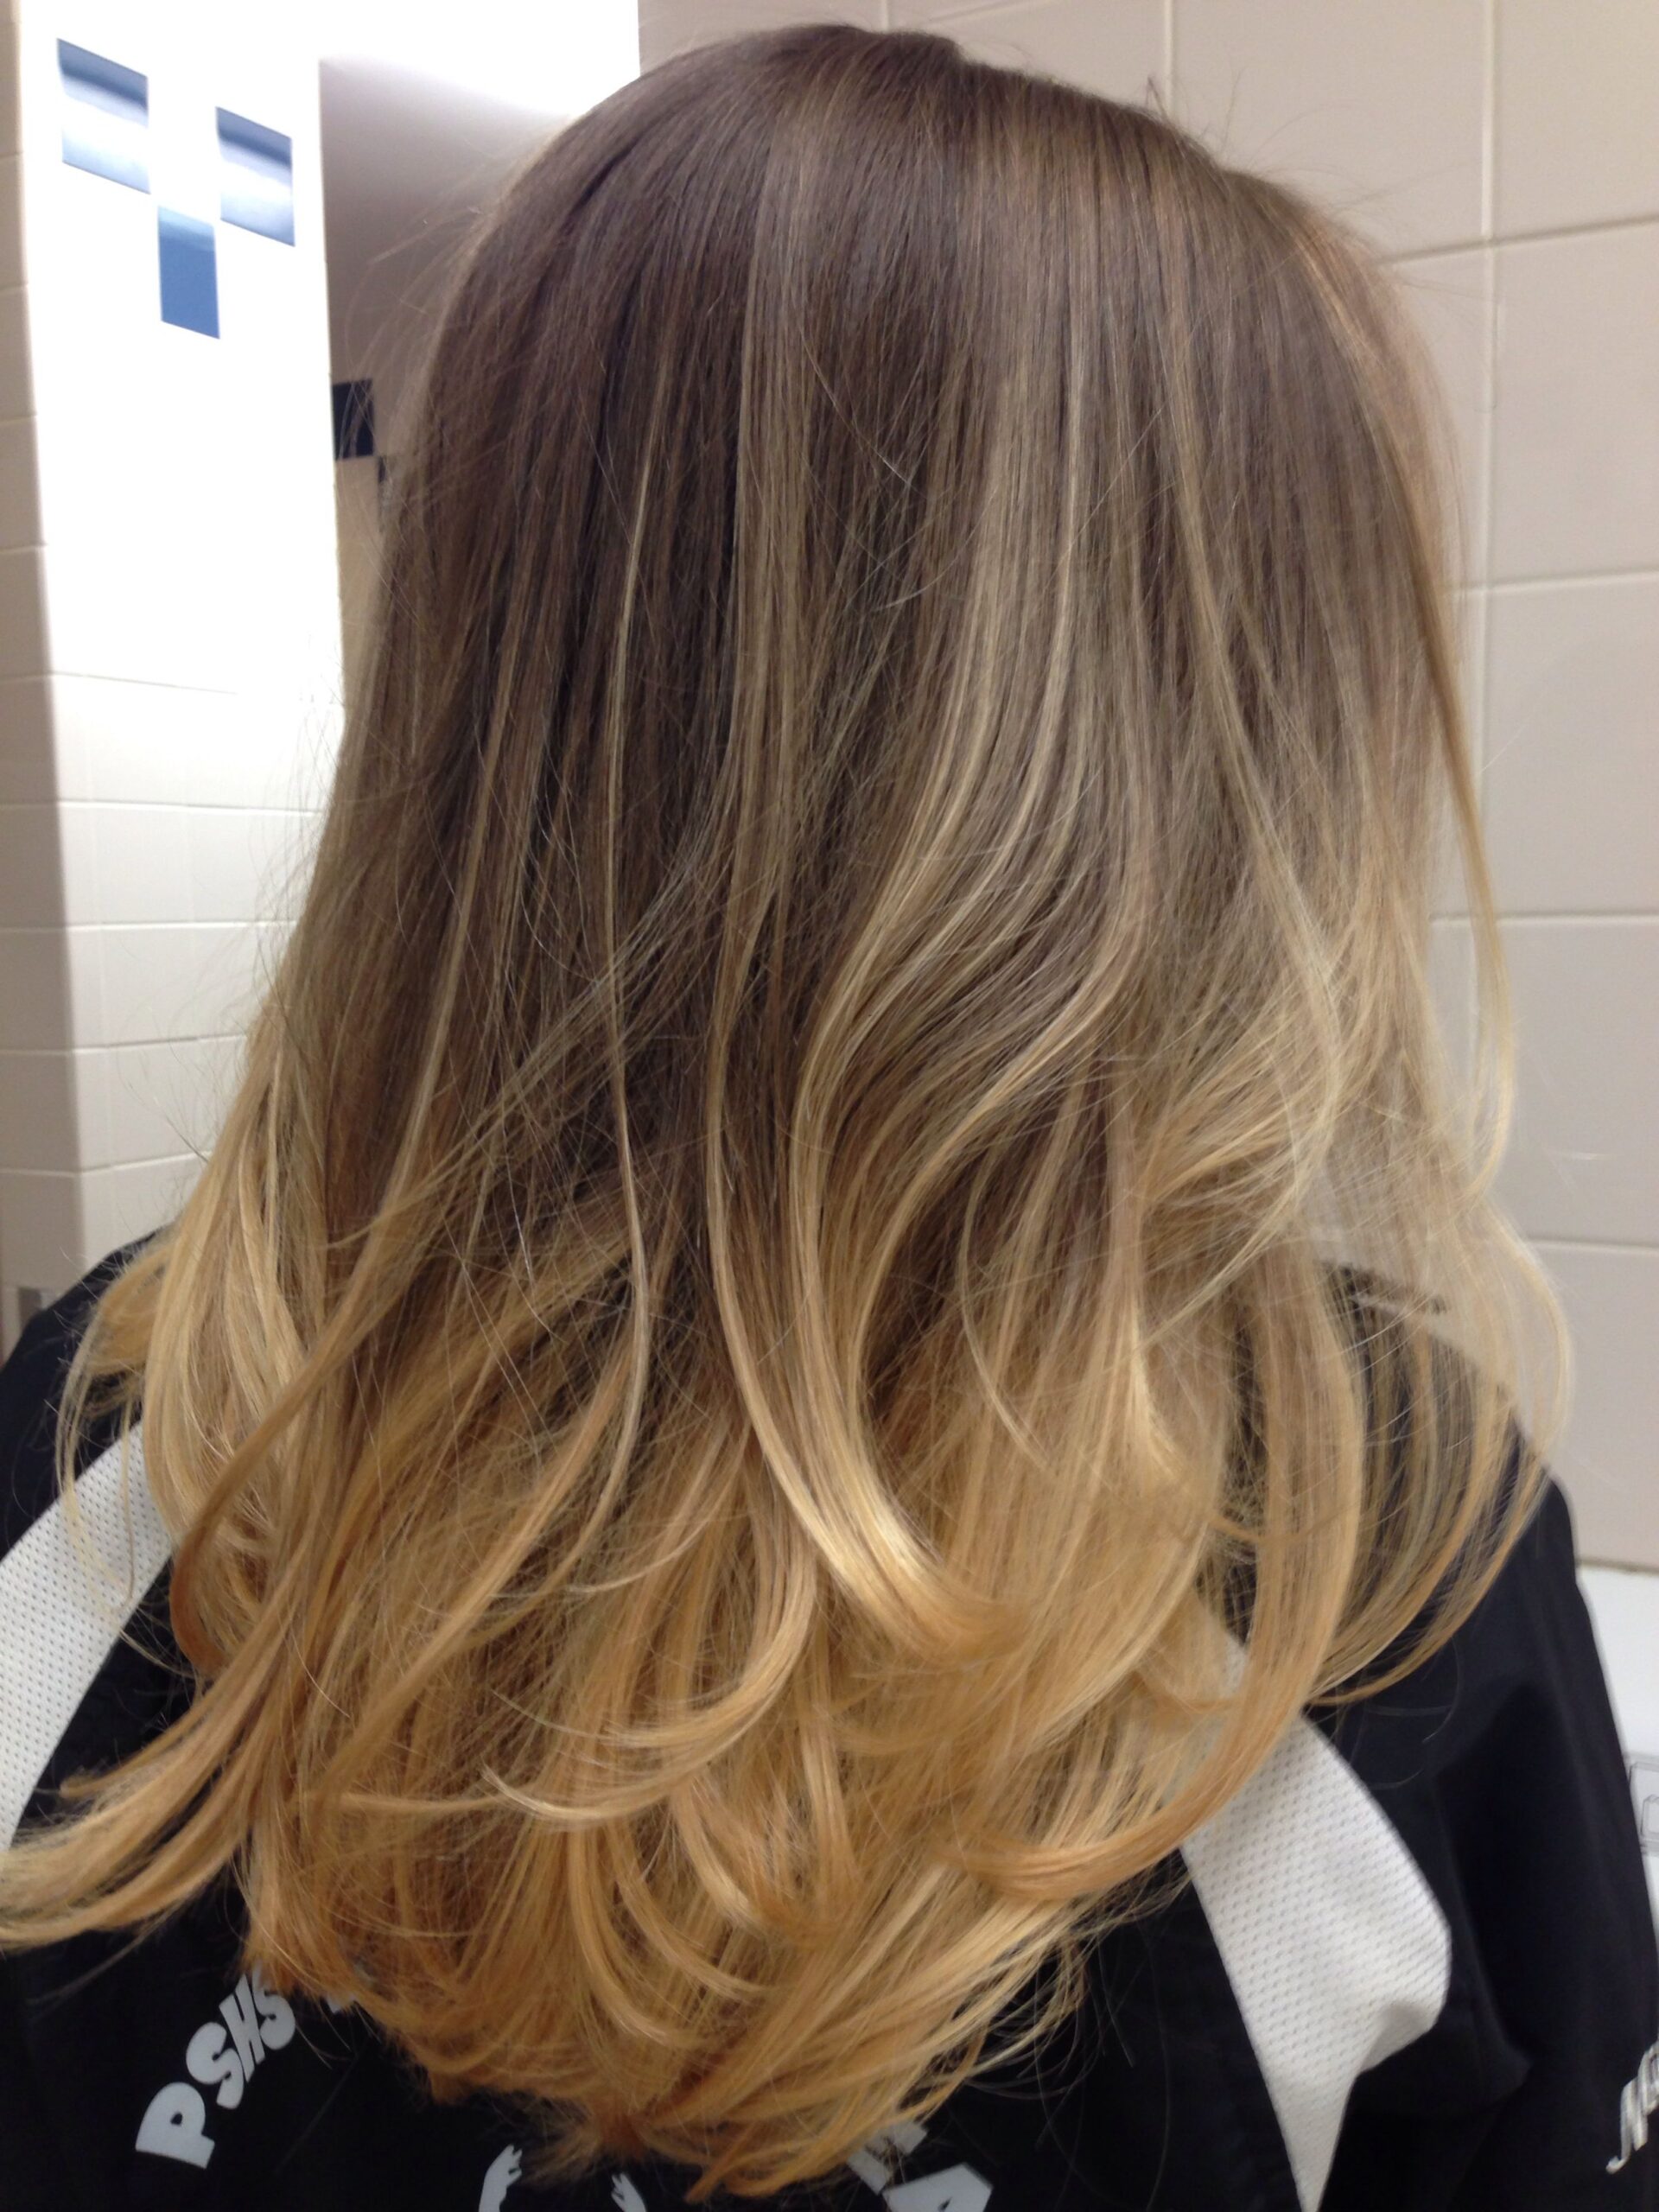 Blond Ombre Hairstyle